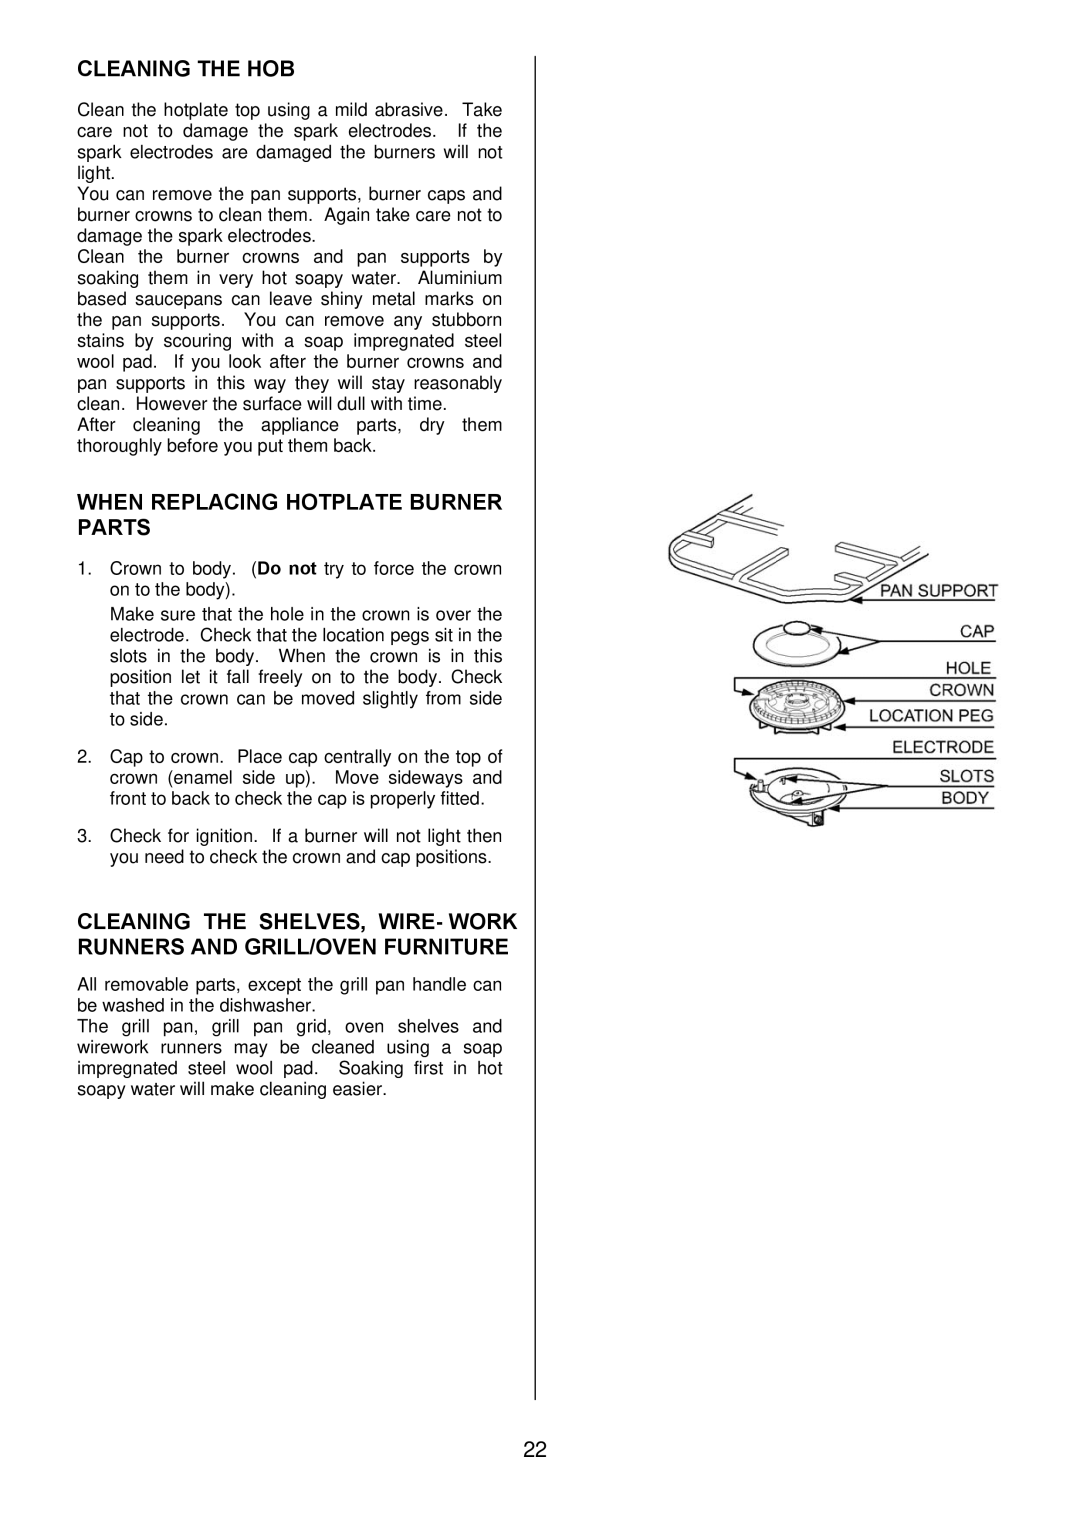 Electrolux EKM6047 user manual Cleaning the HOB, When Replacing Hotplate Burner Parts 